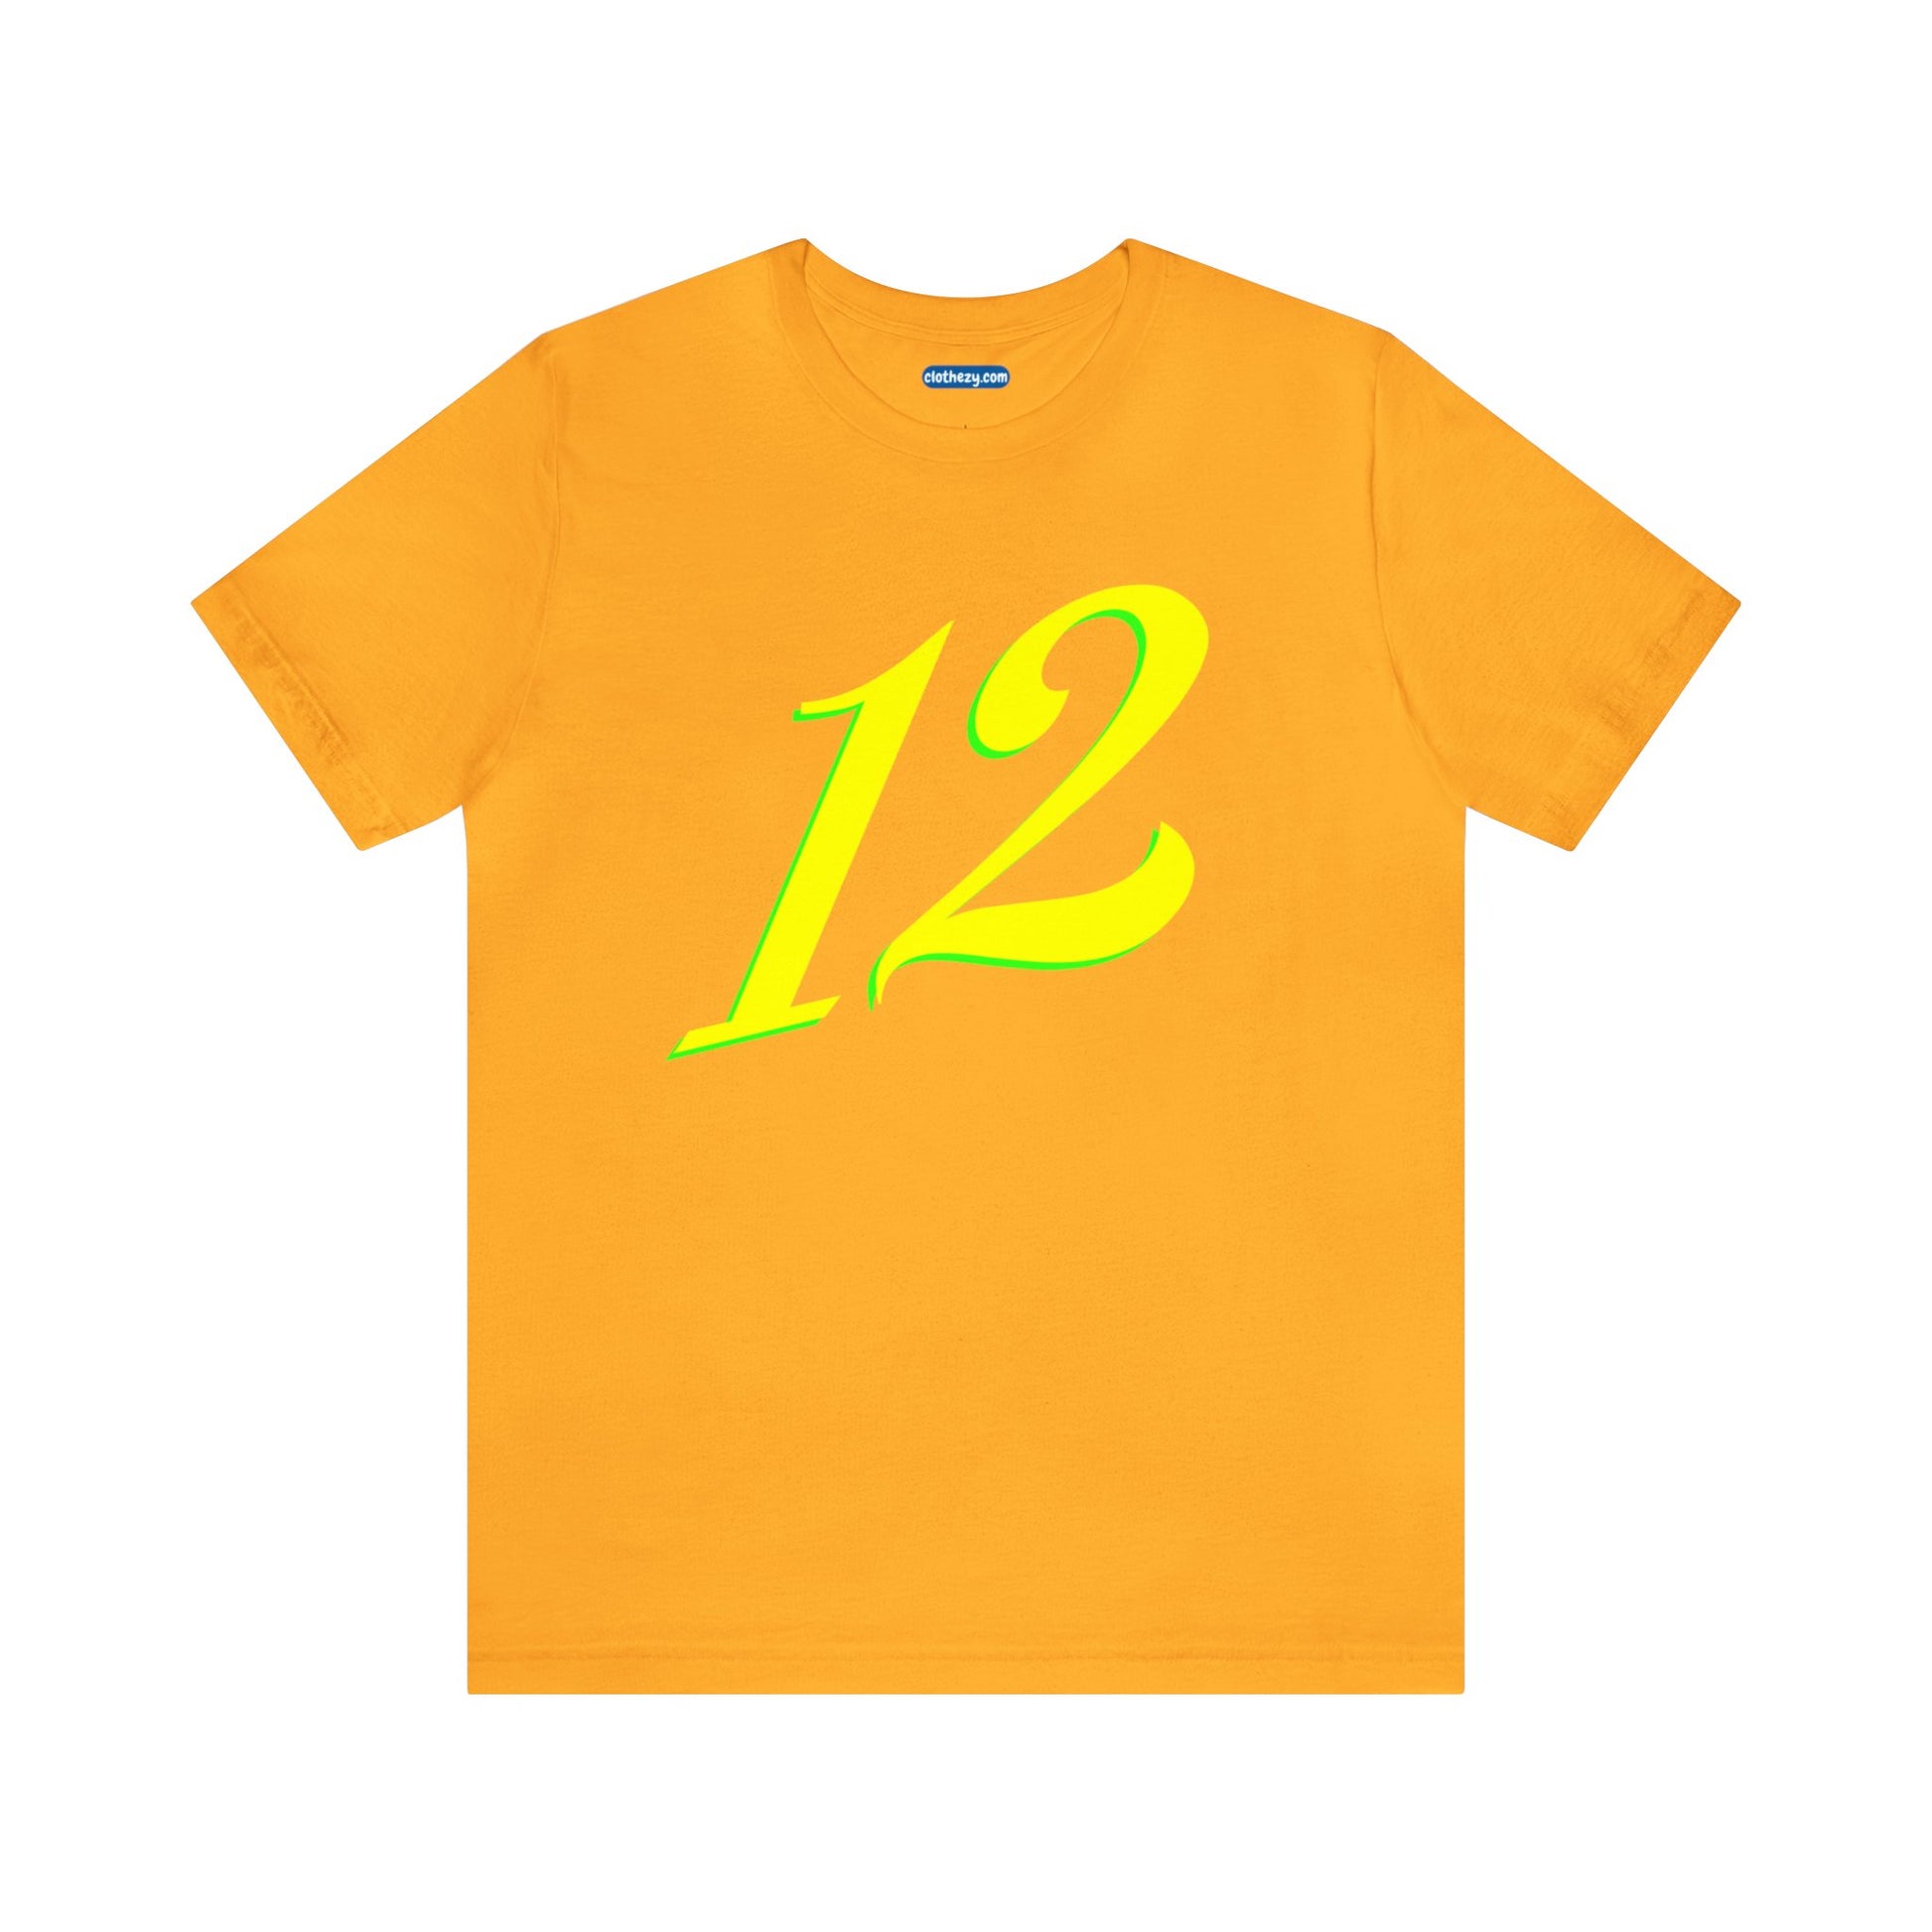 Number 12 Design - Soft Cotton Tee for birthdays and celebrations, Gift for friends and family, Multiple Options by clothezy.com in Green Heather Size Small - Buy Now